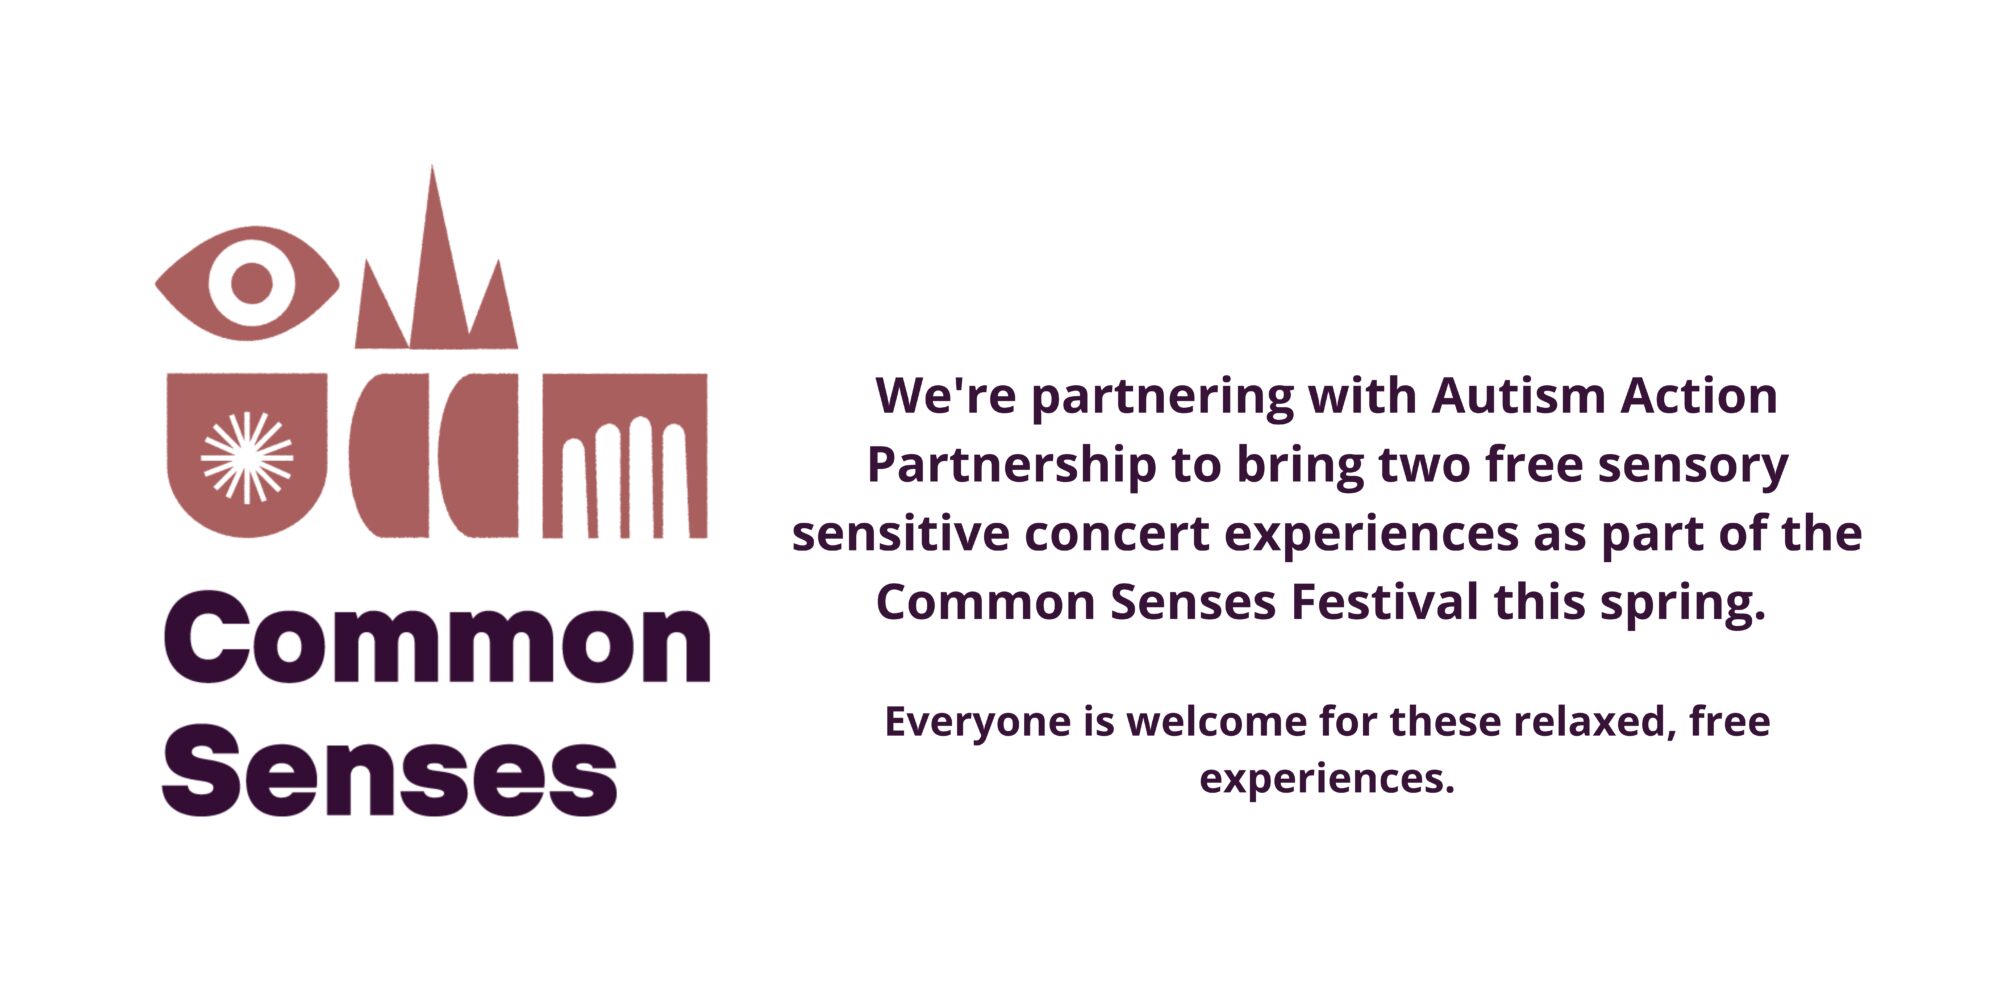 Were partnering with Autism Action Partnership to bring two free sensory sensitive concert experiences as part of the Common Senses Festival this spring Everyone is welcome for these relaxed free experiences 24 6